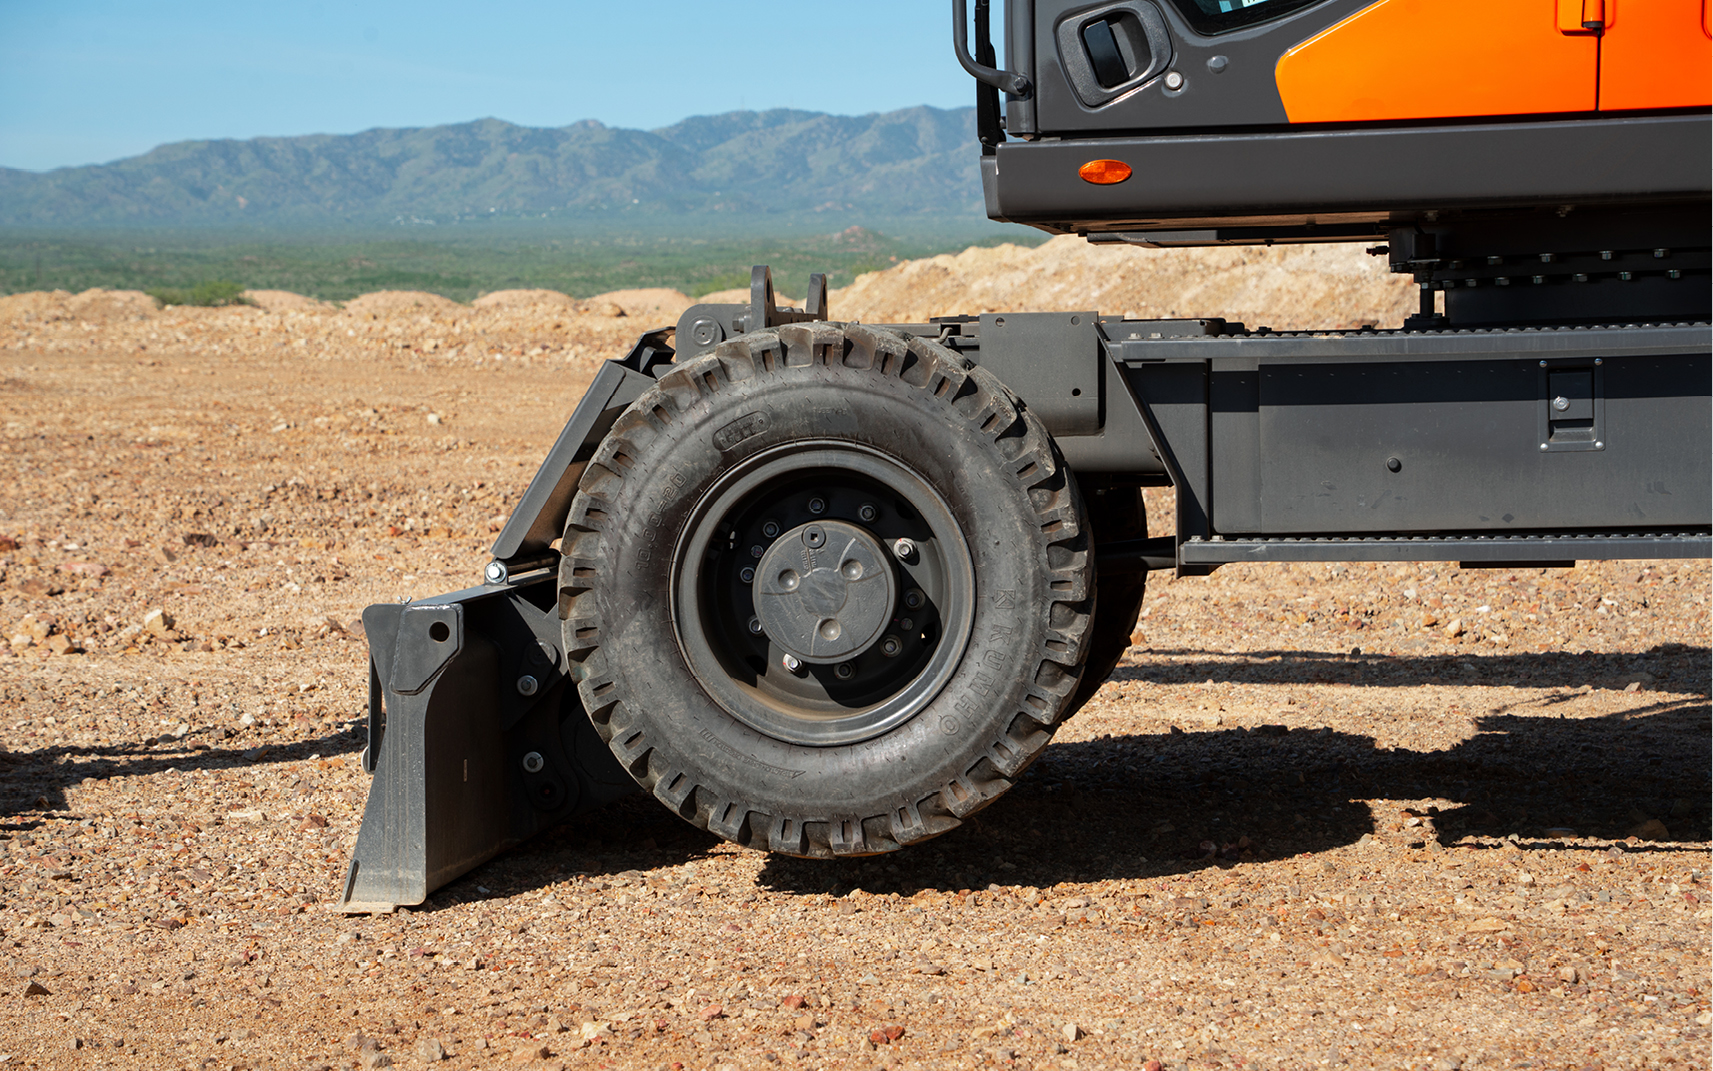 A dozer blade configuration is popular for a wheel excavator.